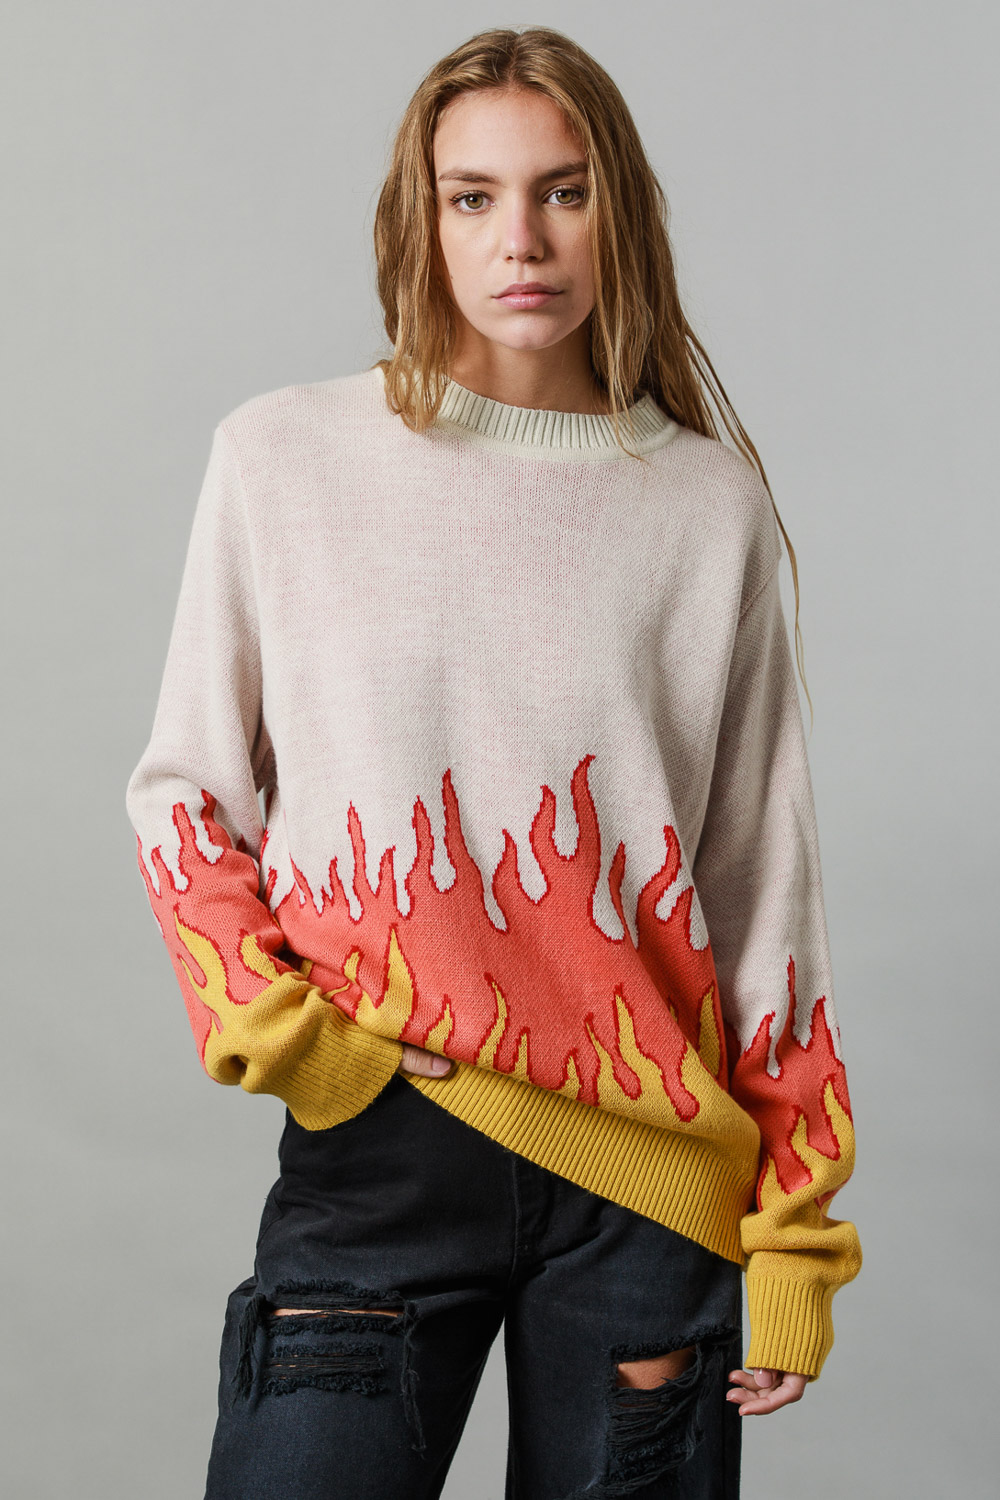 johnlcook_sweater-new-flames_11-30-2022__picture-8541